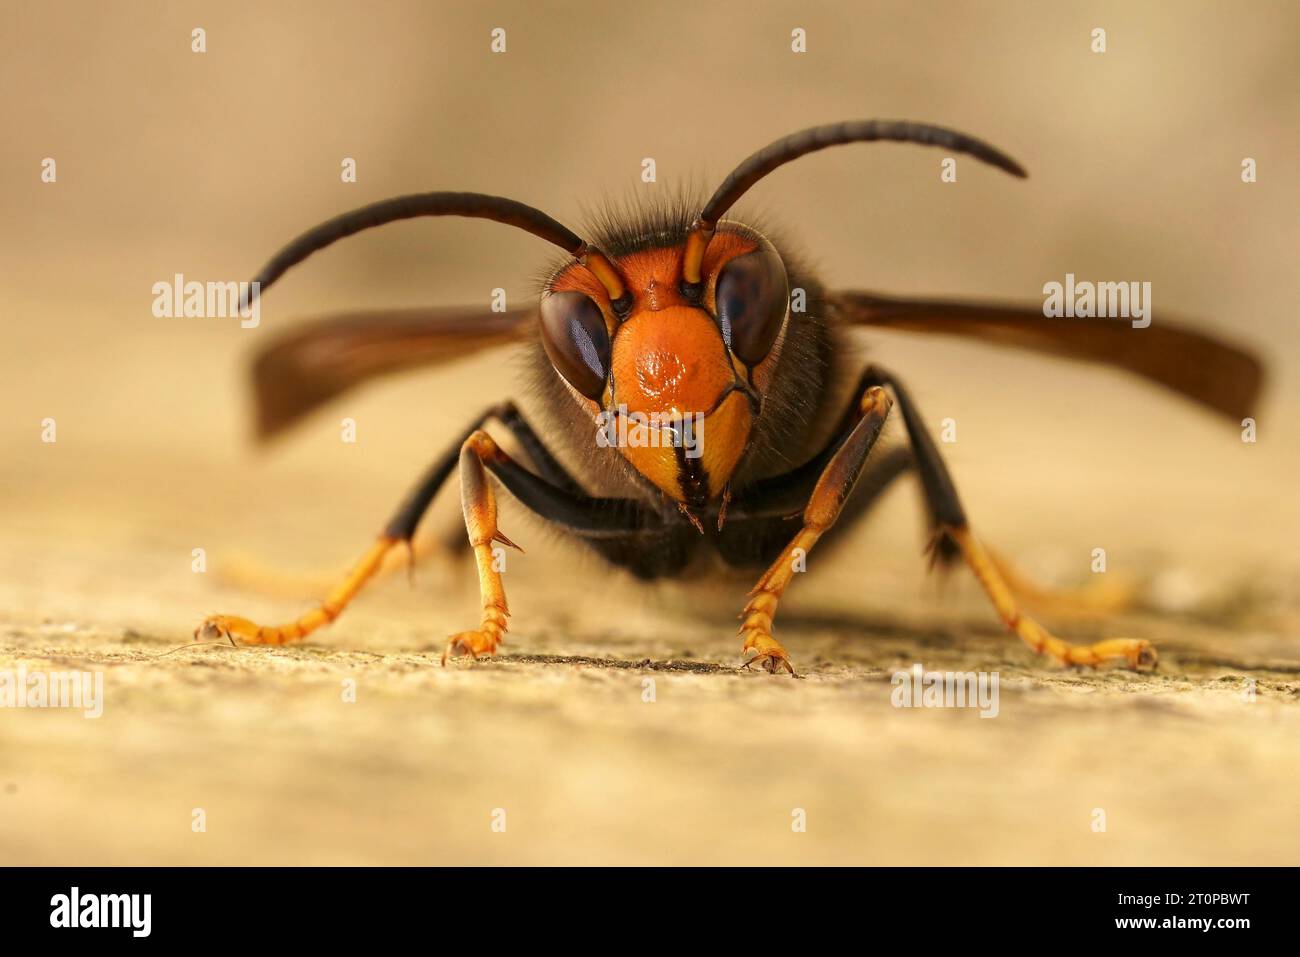 Natural facial closeup on a worker of the invasive Asian hornet pest species, Vespa velutina, a major threat for beekeeping Stock Photo